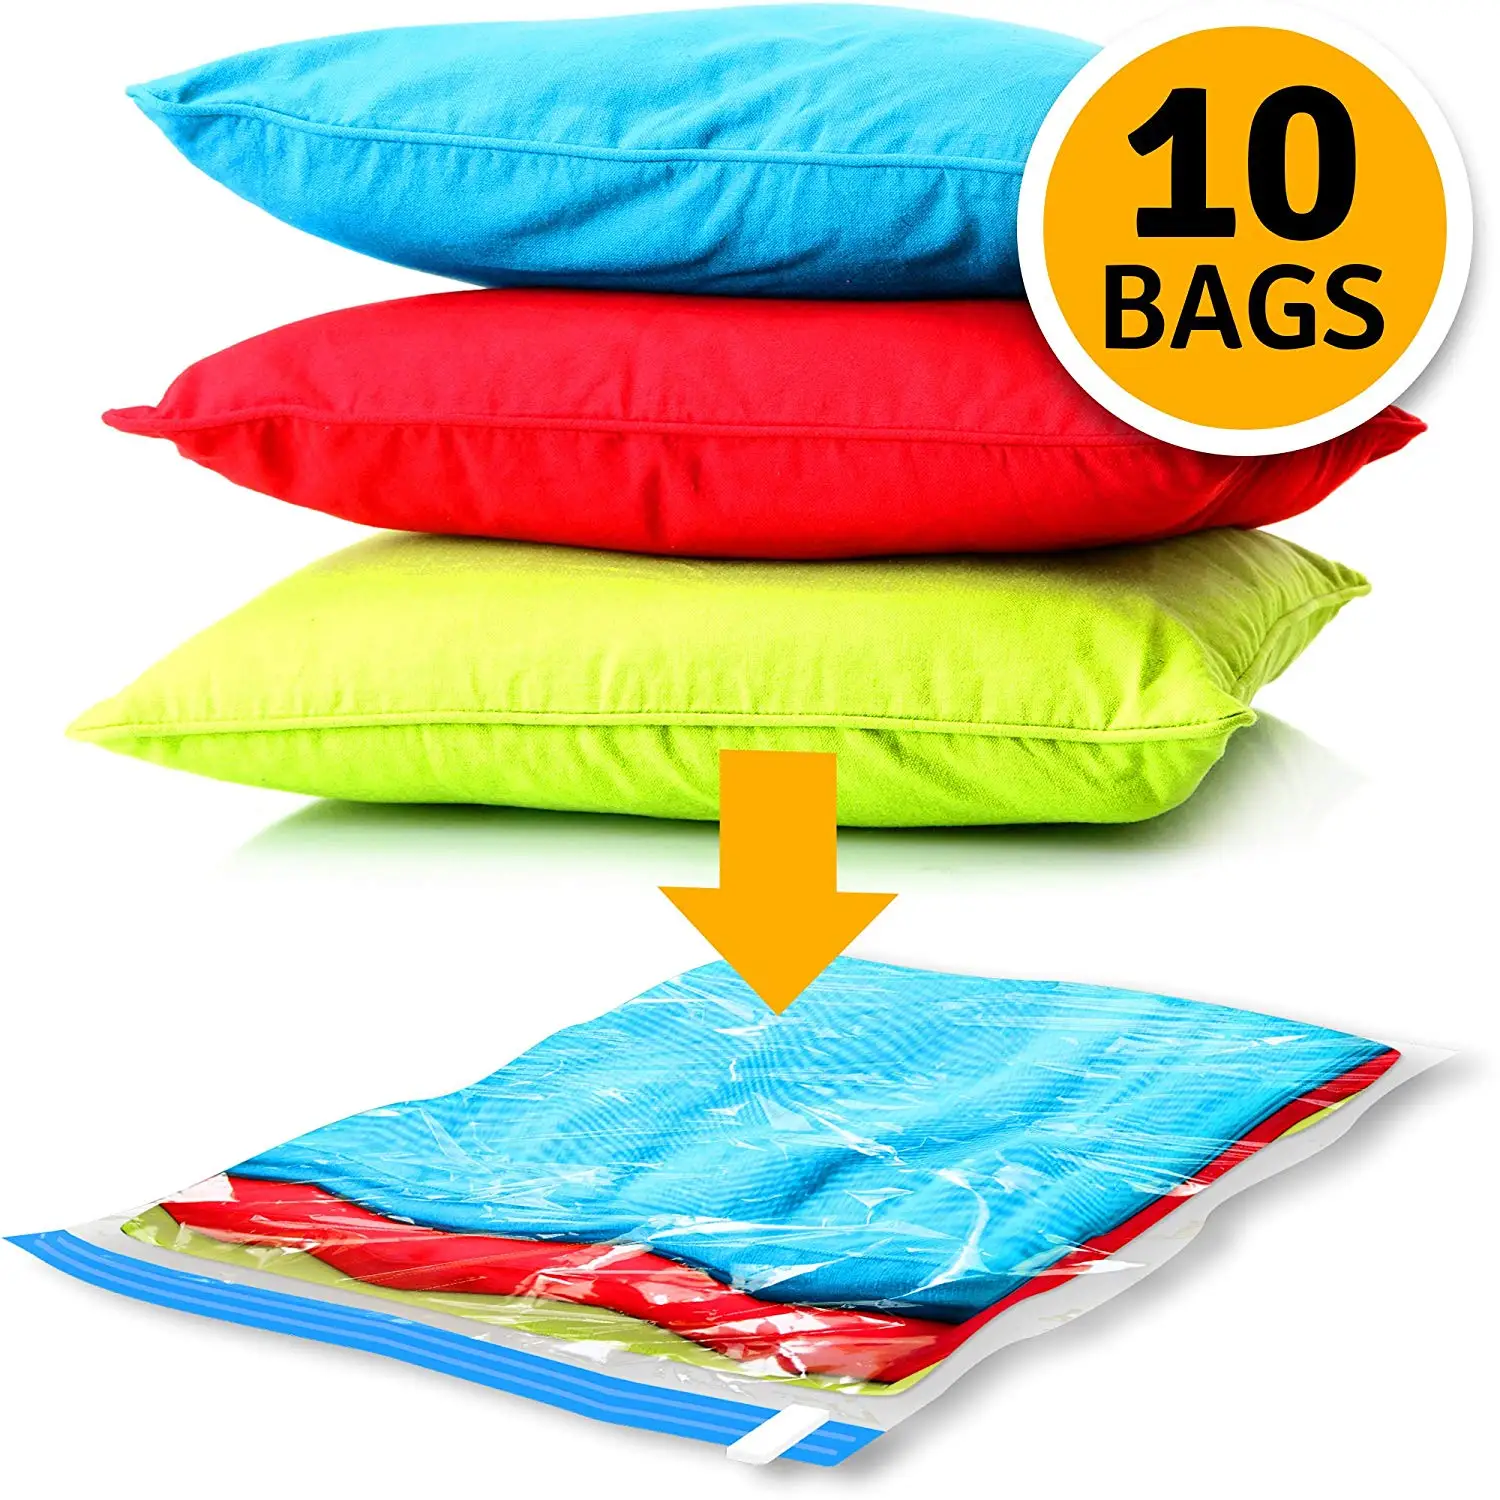 space saver bags lowes